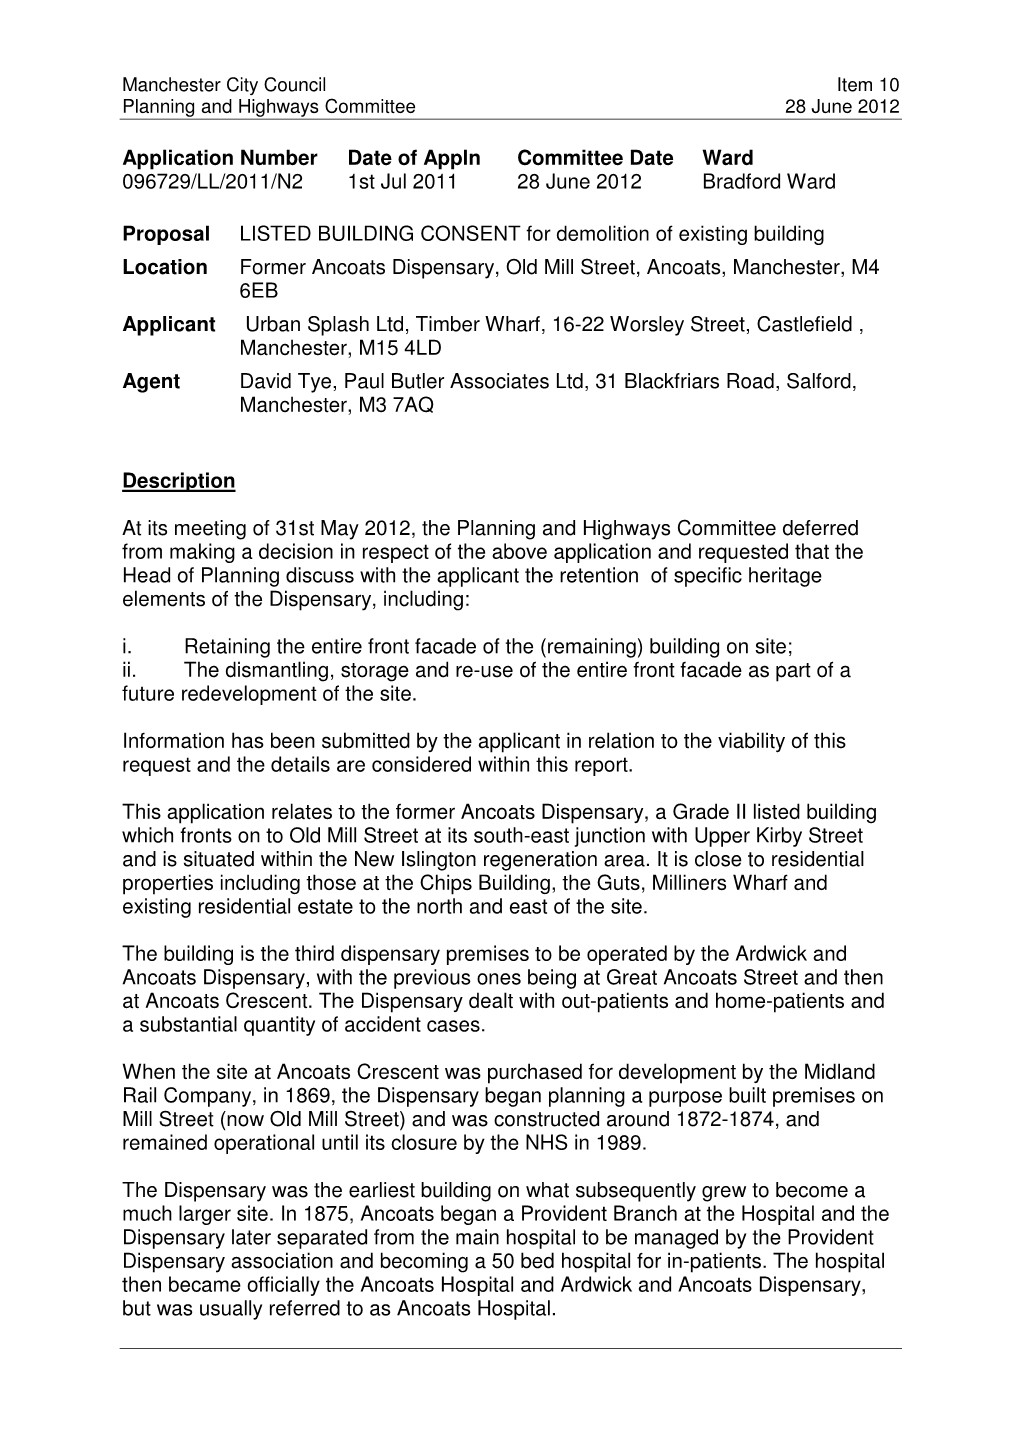 10 Planning and Highways Committee 28 June 2012